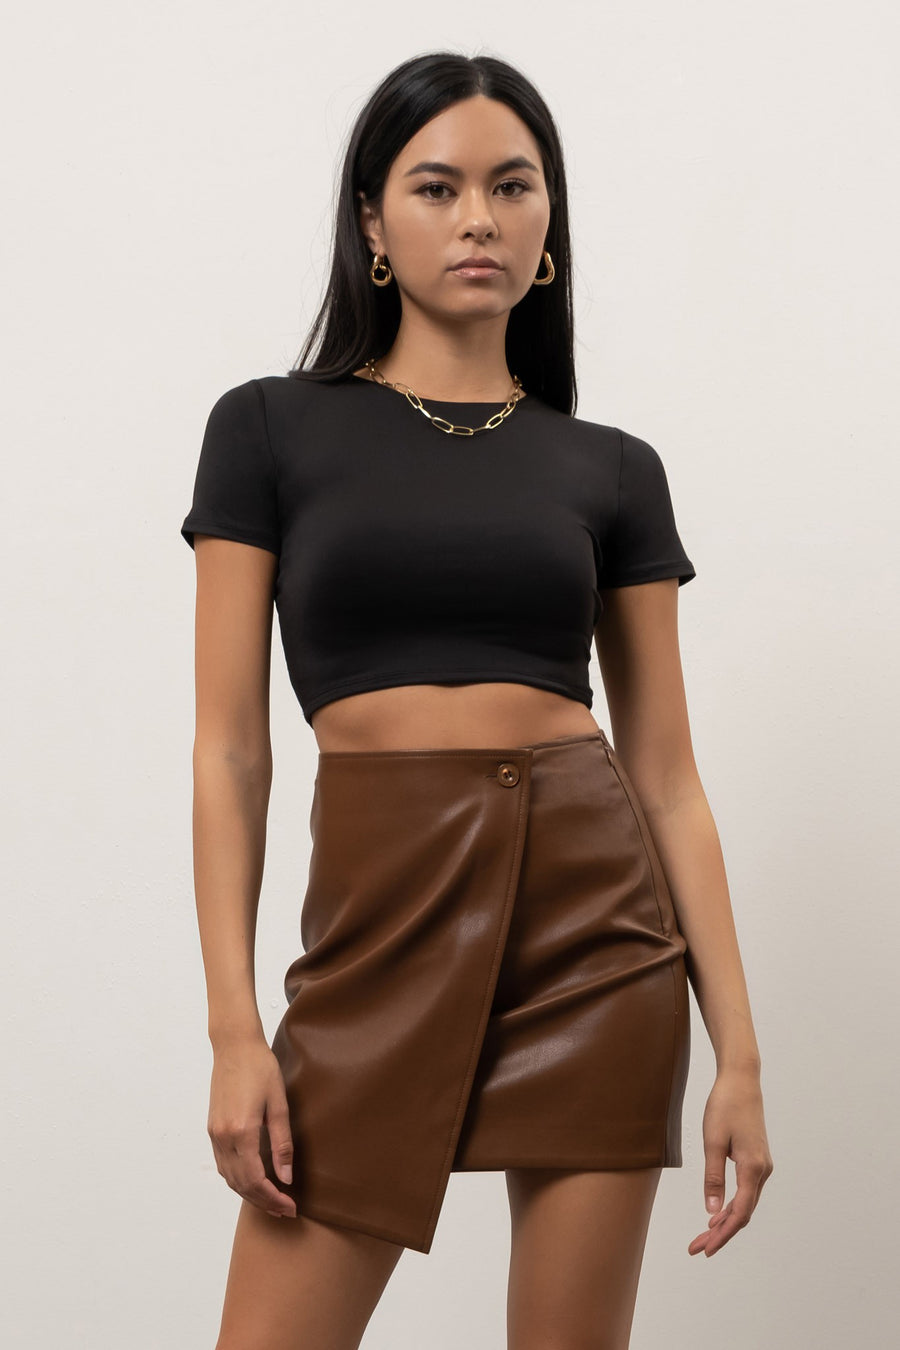 Featuring a short sleeve, round neck, cropped top